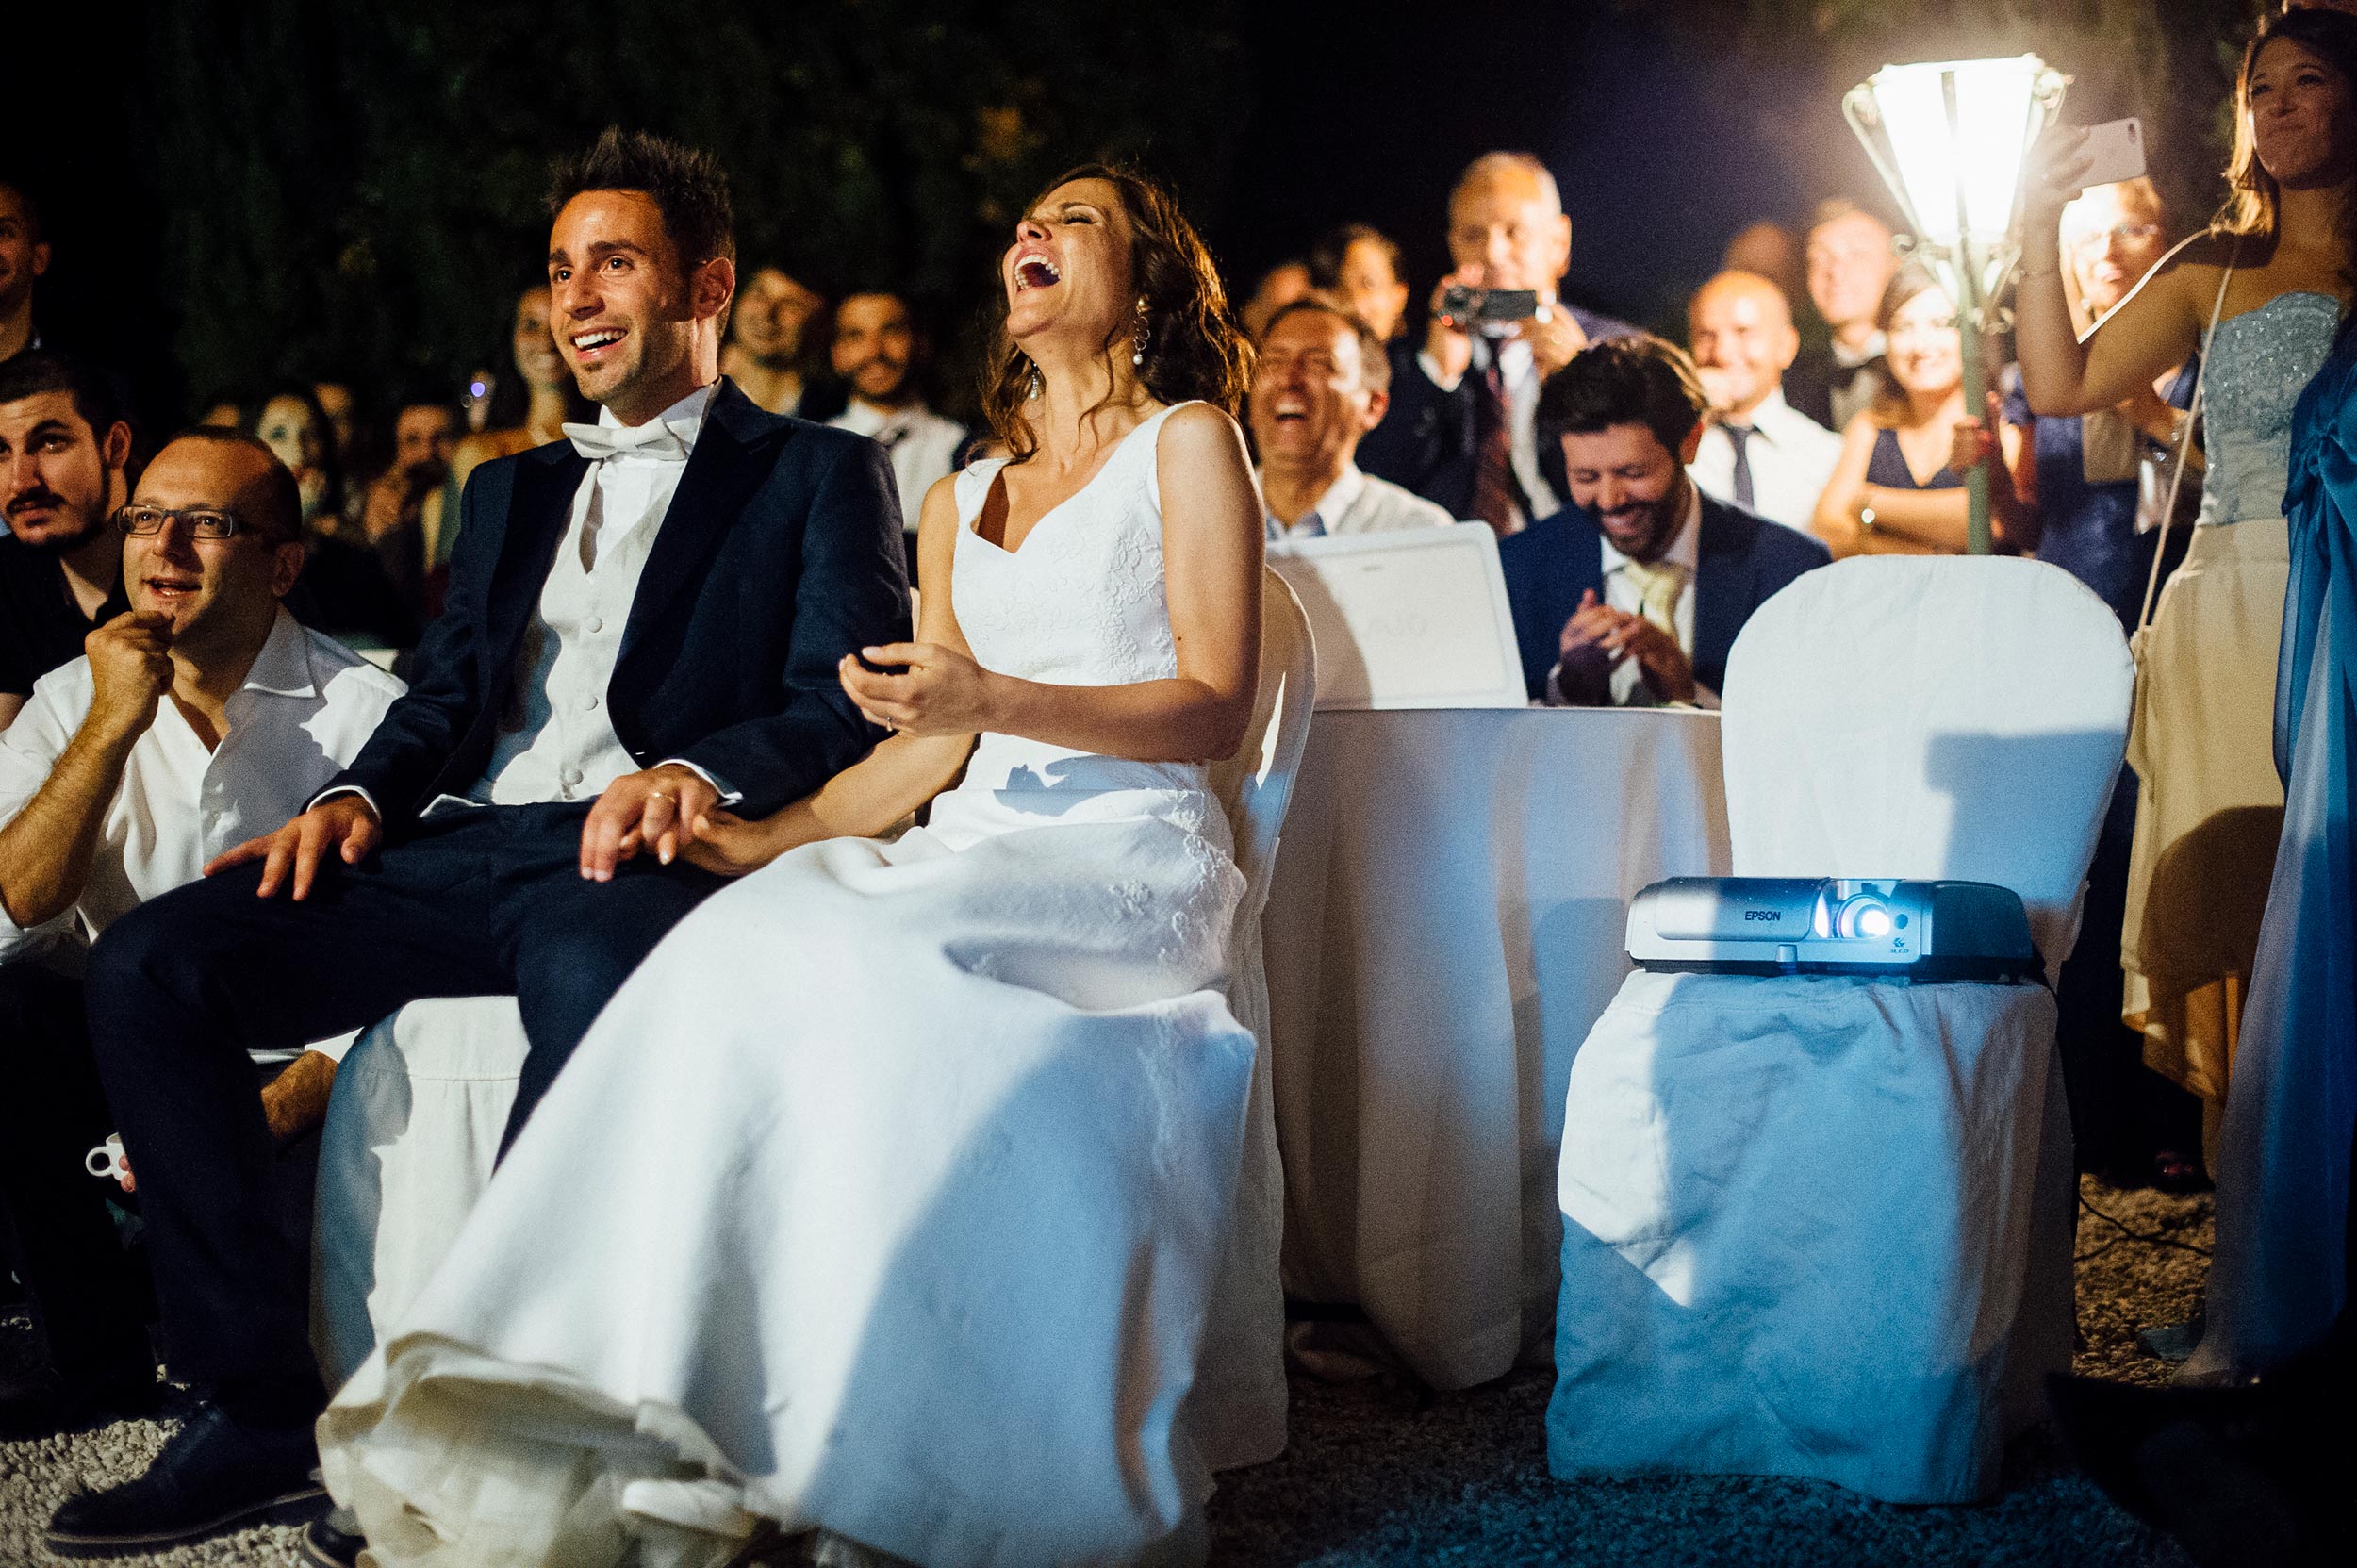 the-bride-and-groom-laughing-at-their-surprise-video.jpg